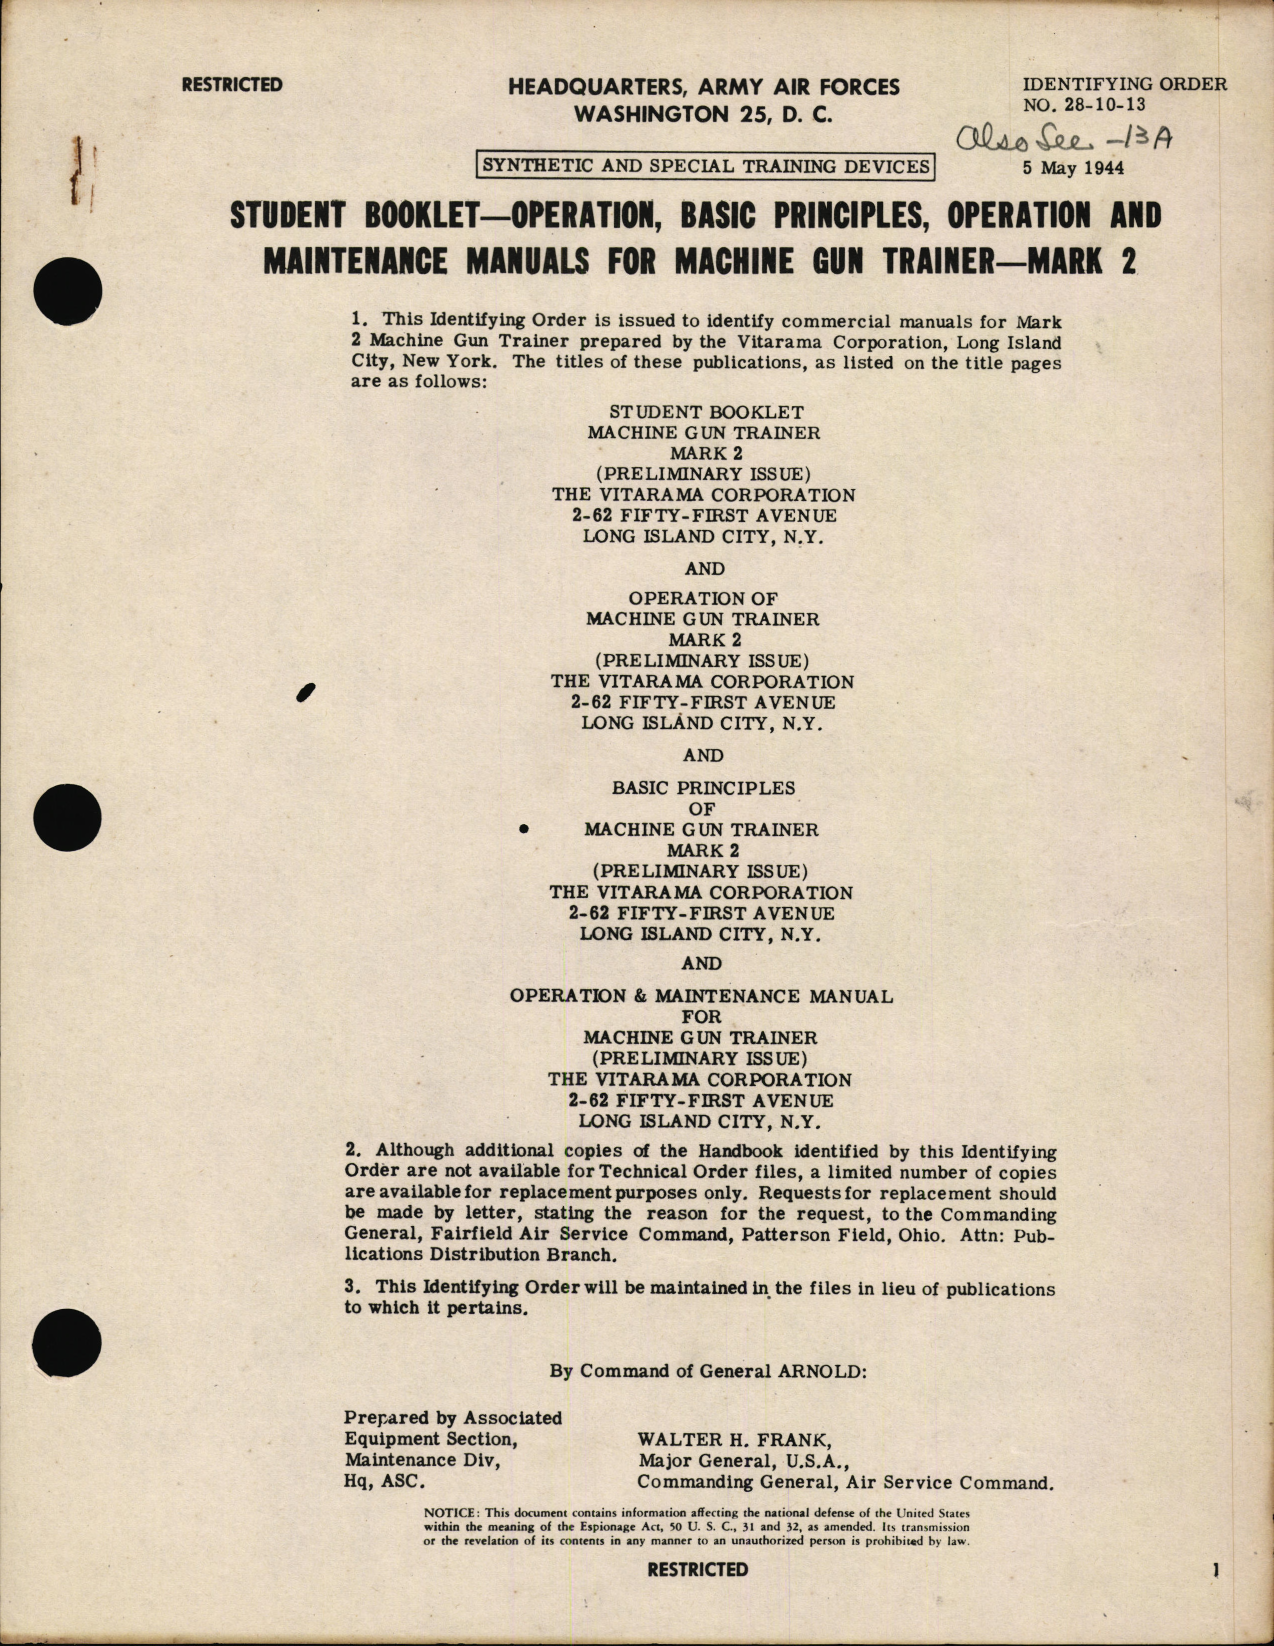 Sample page 1 from AirCorps Library document: Student booklet for Operation, Basic Principles, Operation and Maintenance Manuals for Machine Gun Trainer Mark 2